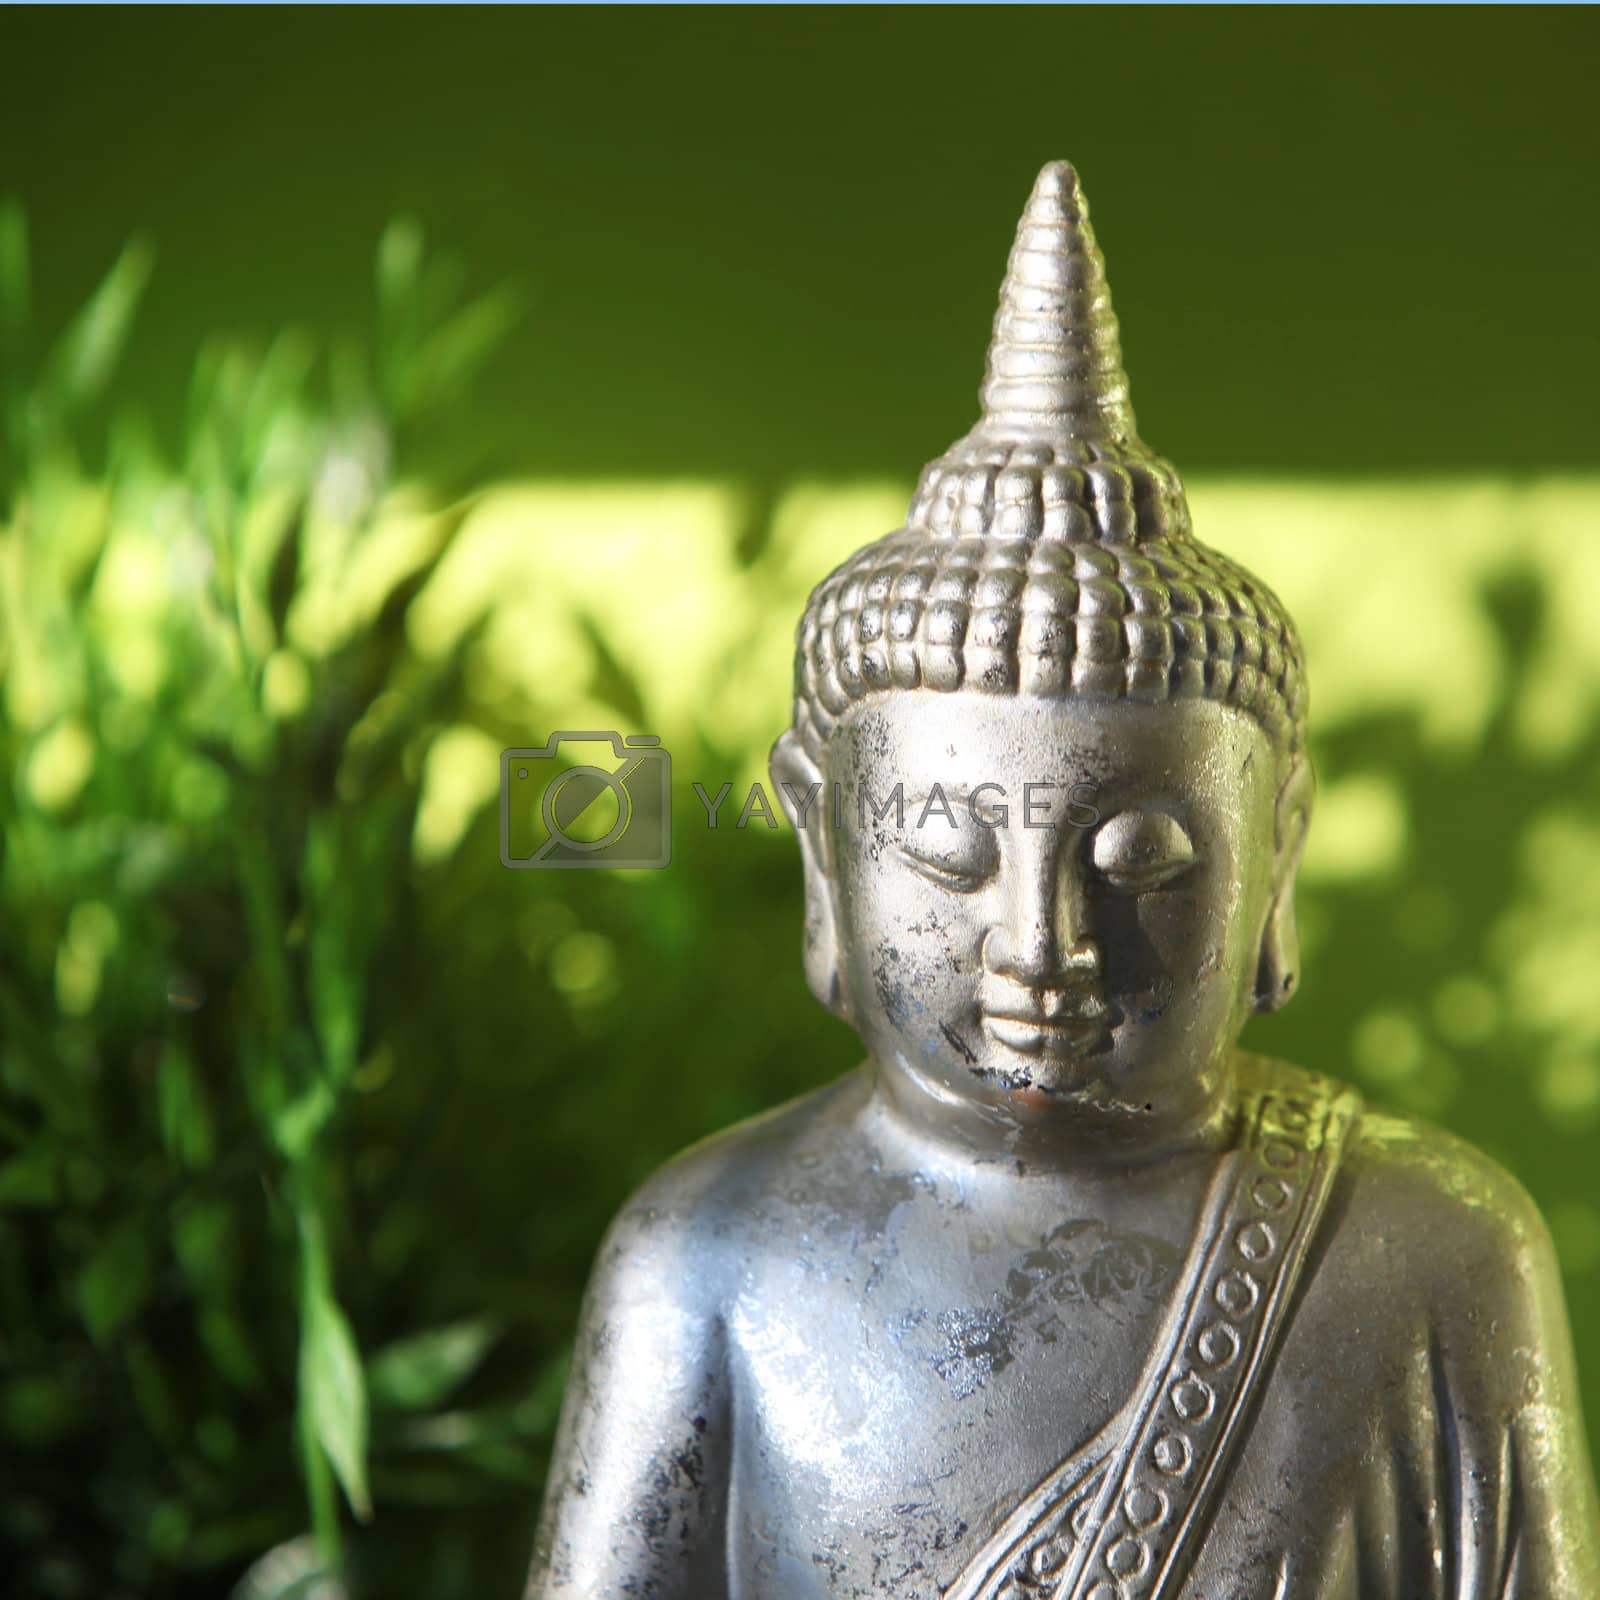 Royalty free image of Statue of Buddha by Farina6000